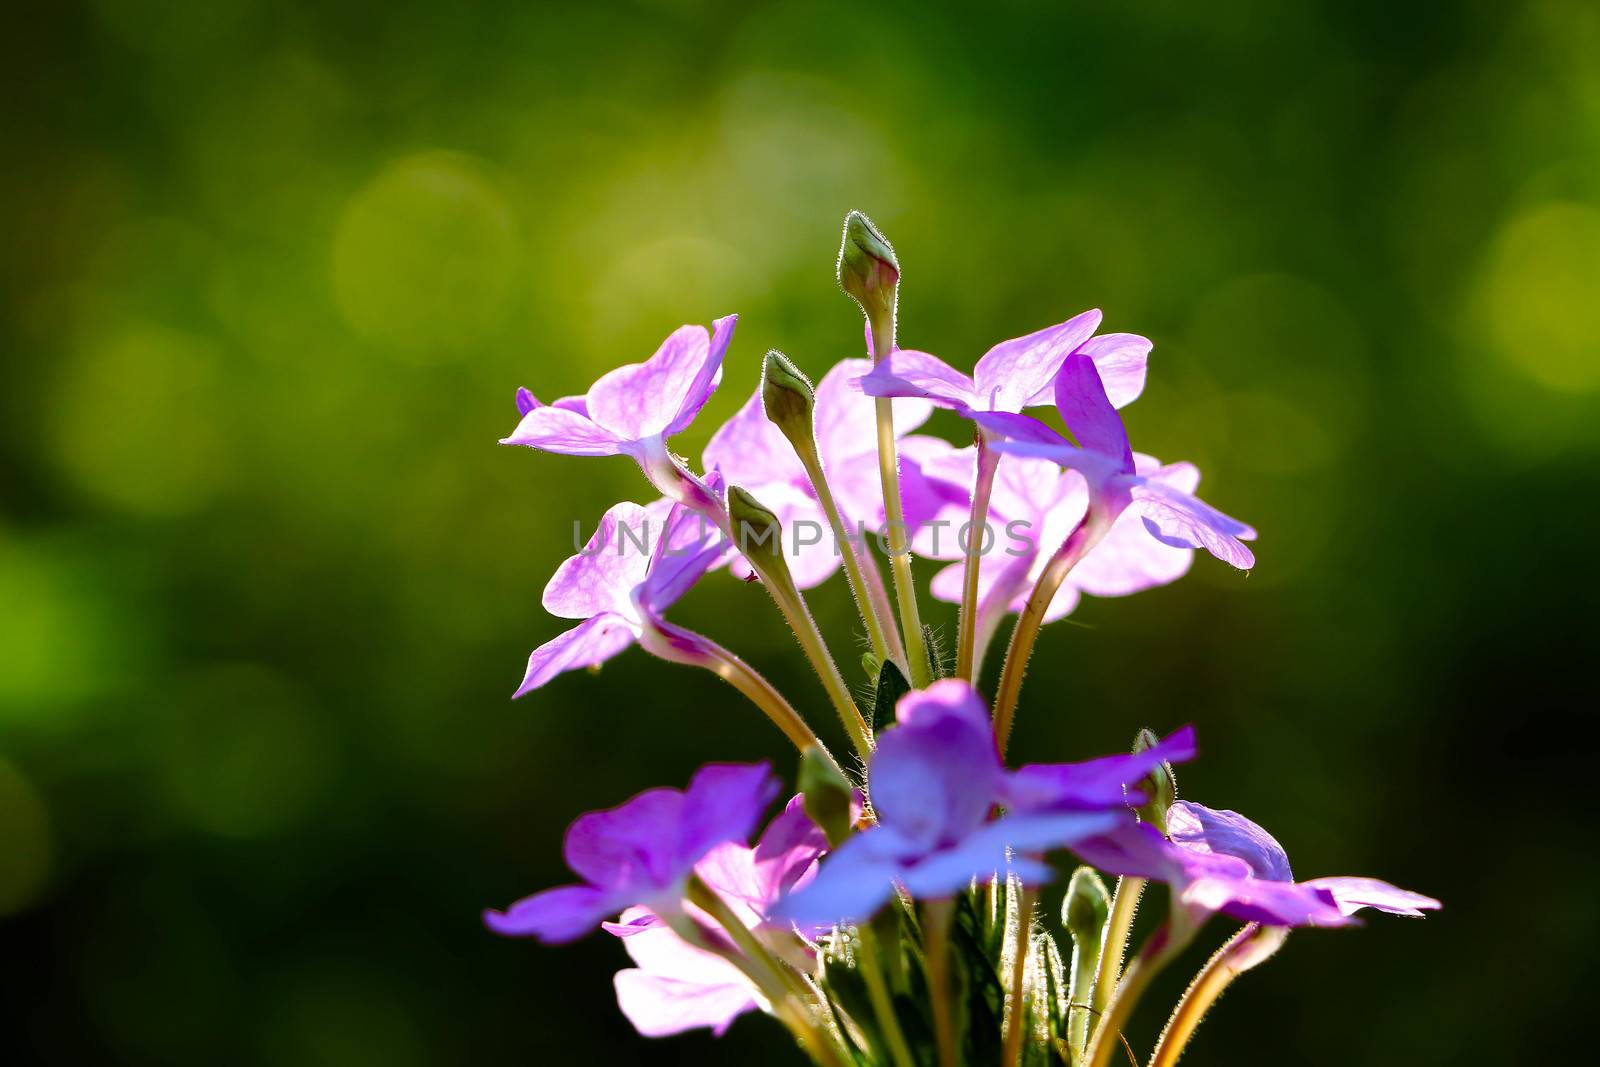 The Small violet flowers with the green nature by e22xua